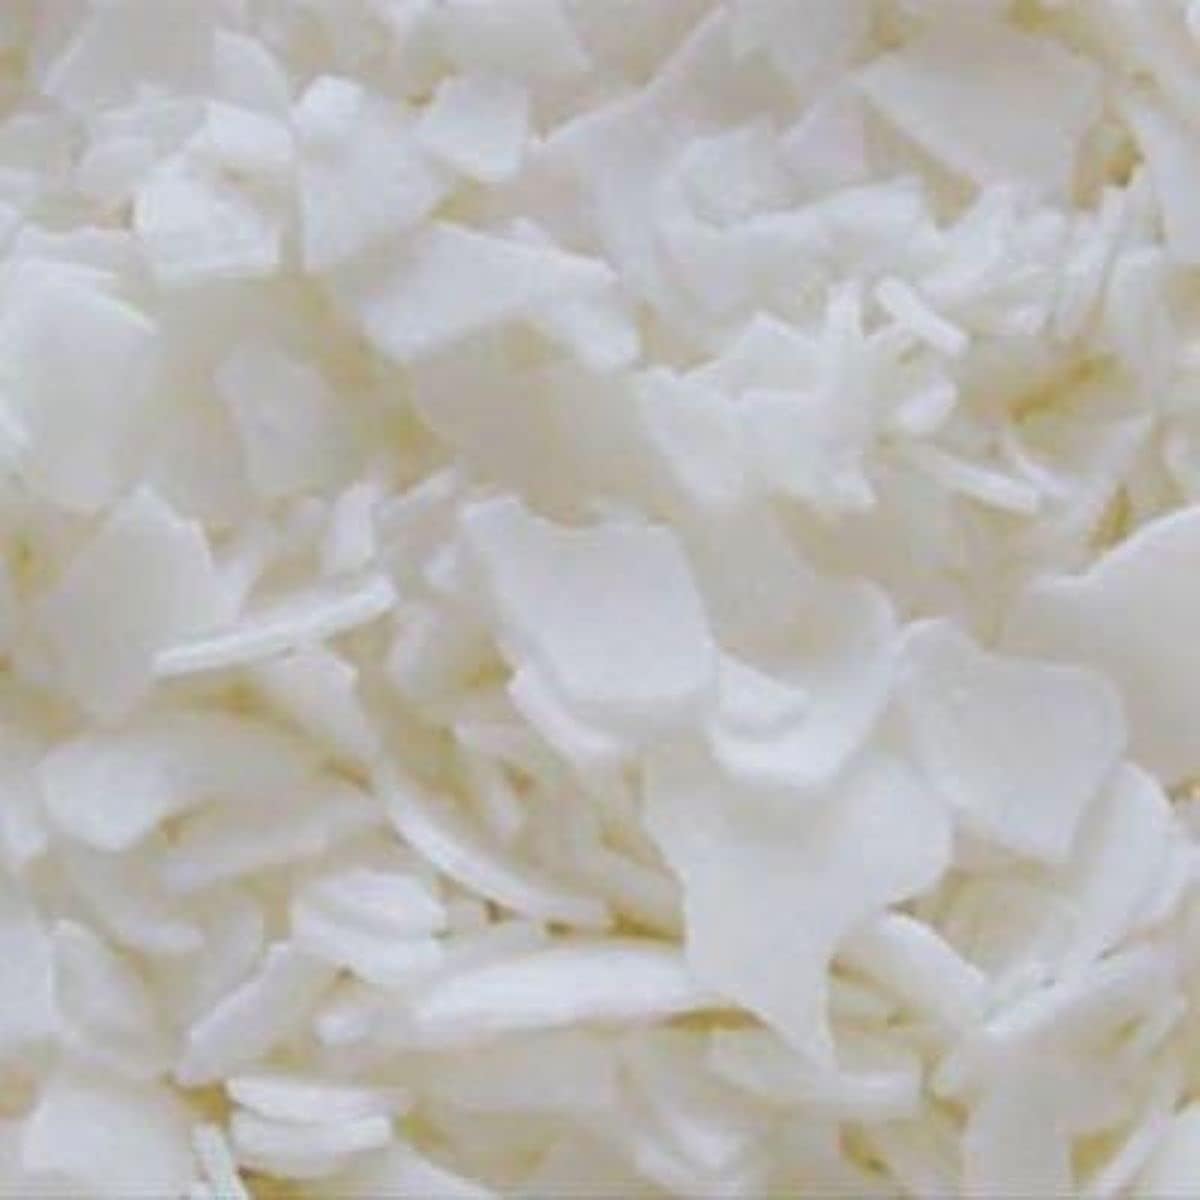 NatureWax C-1 Soy Flakes - 10 LB - Great for Candles, Clamshell Tarts, Snap Bars and Wickless Candles